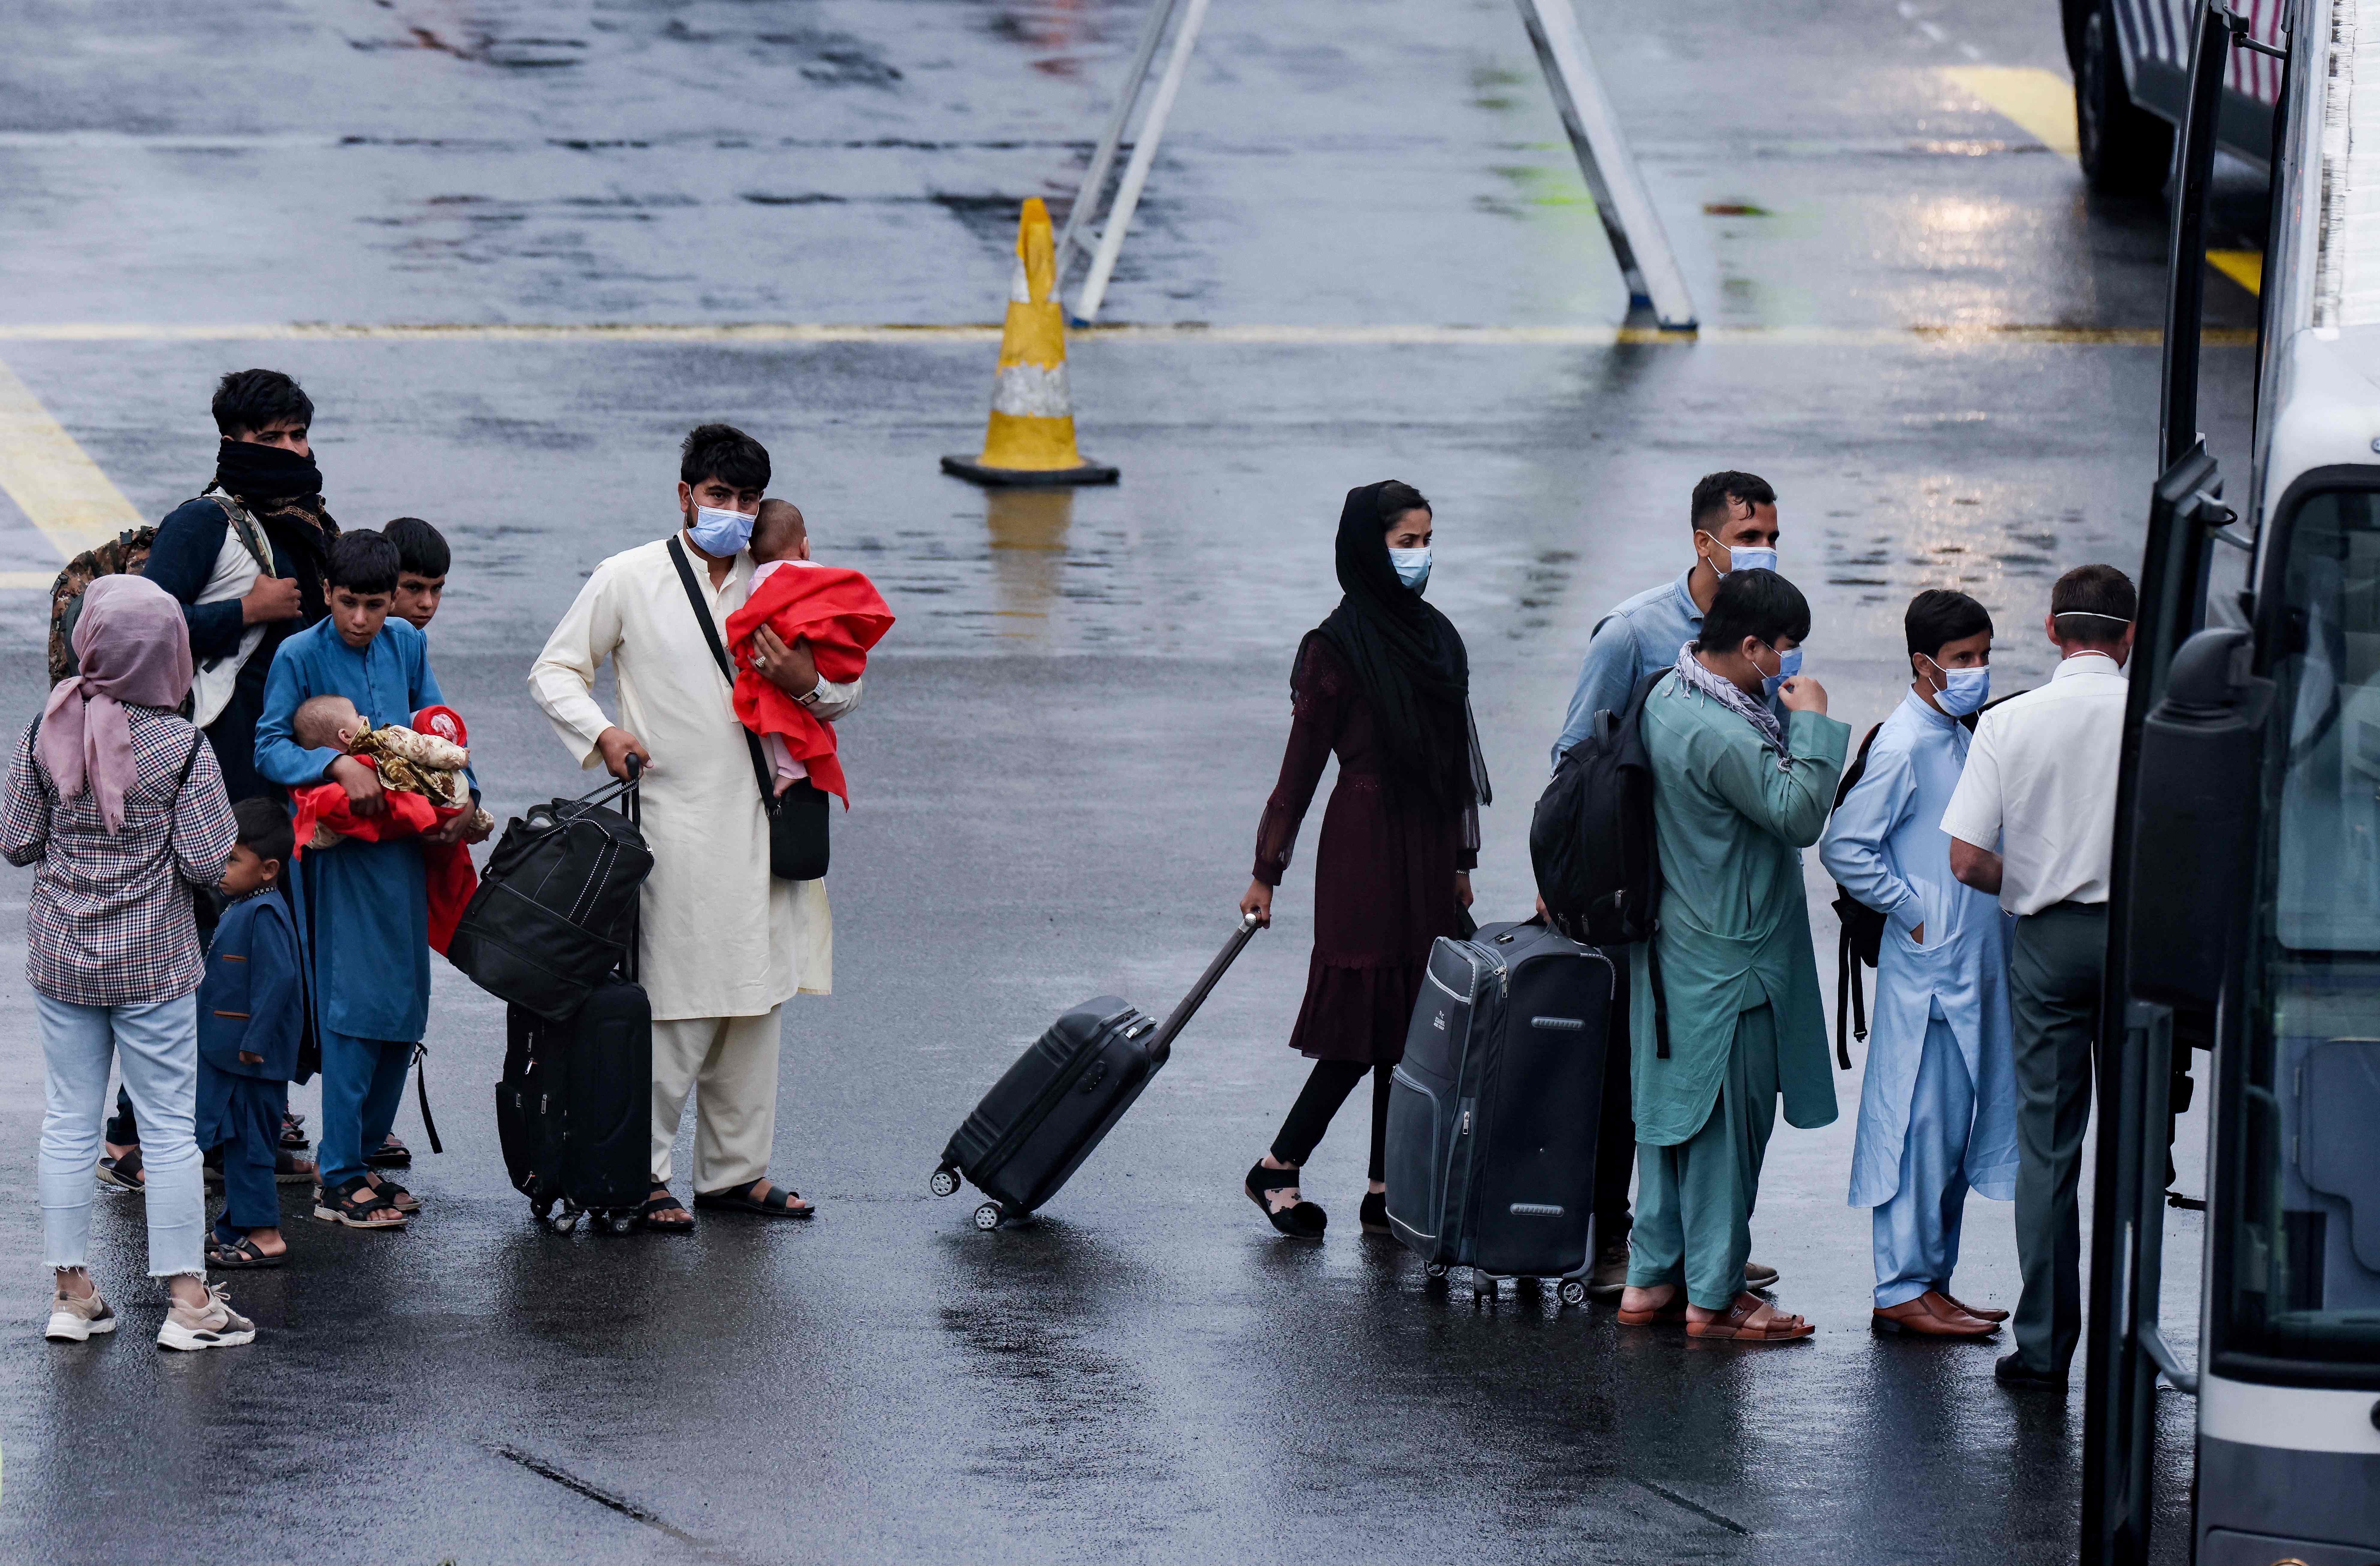 A group of Afghan nationals disembarking from a chartered Air Belgium airplane at the military airport in Melsbroek near Brussels